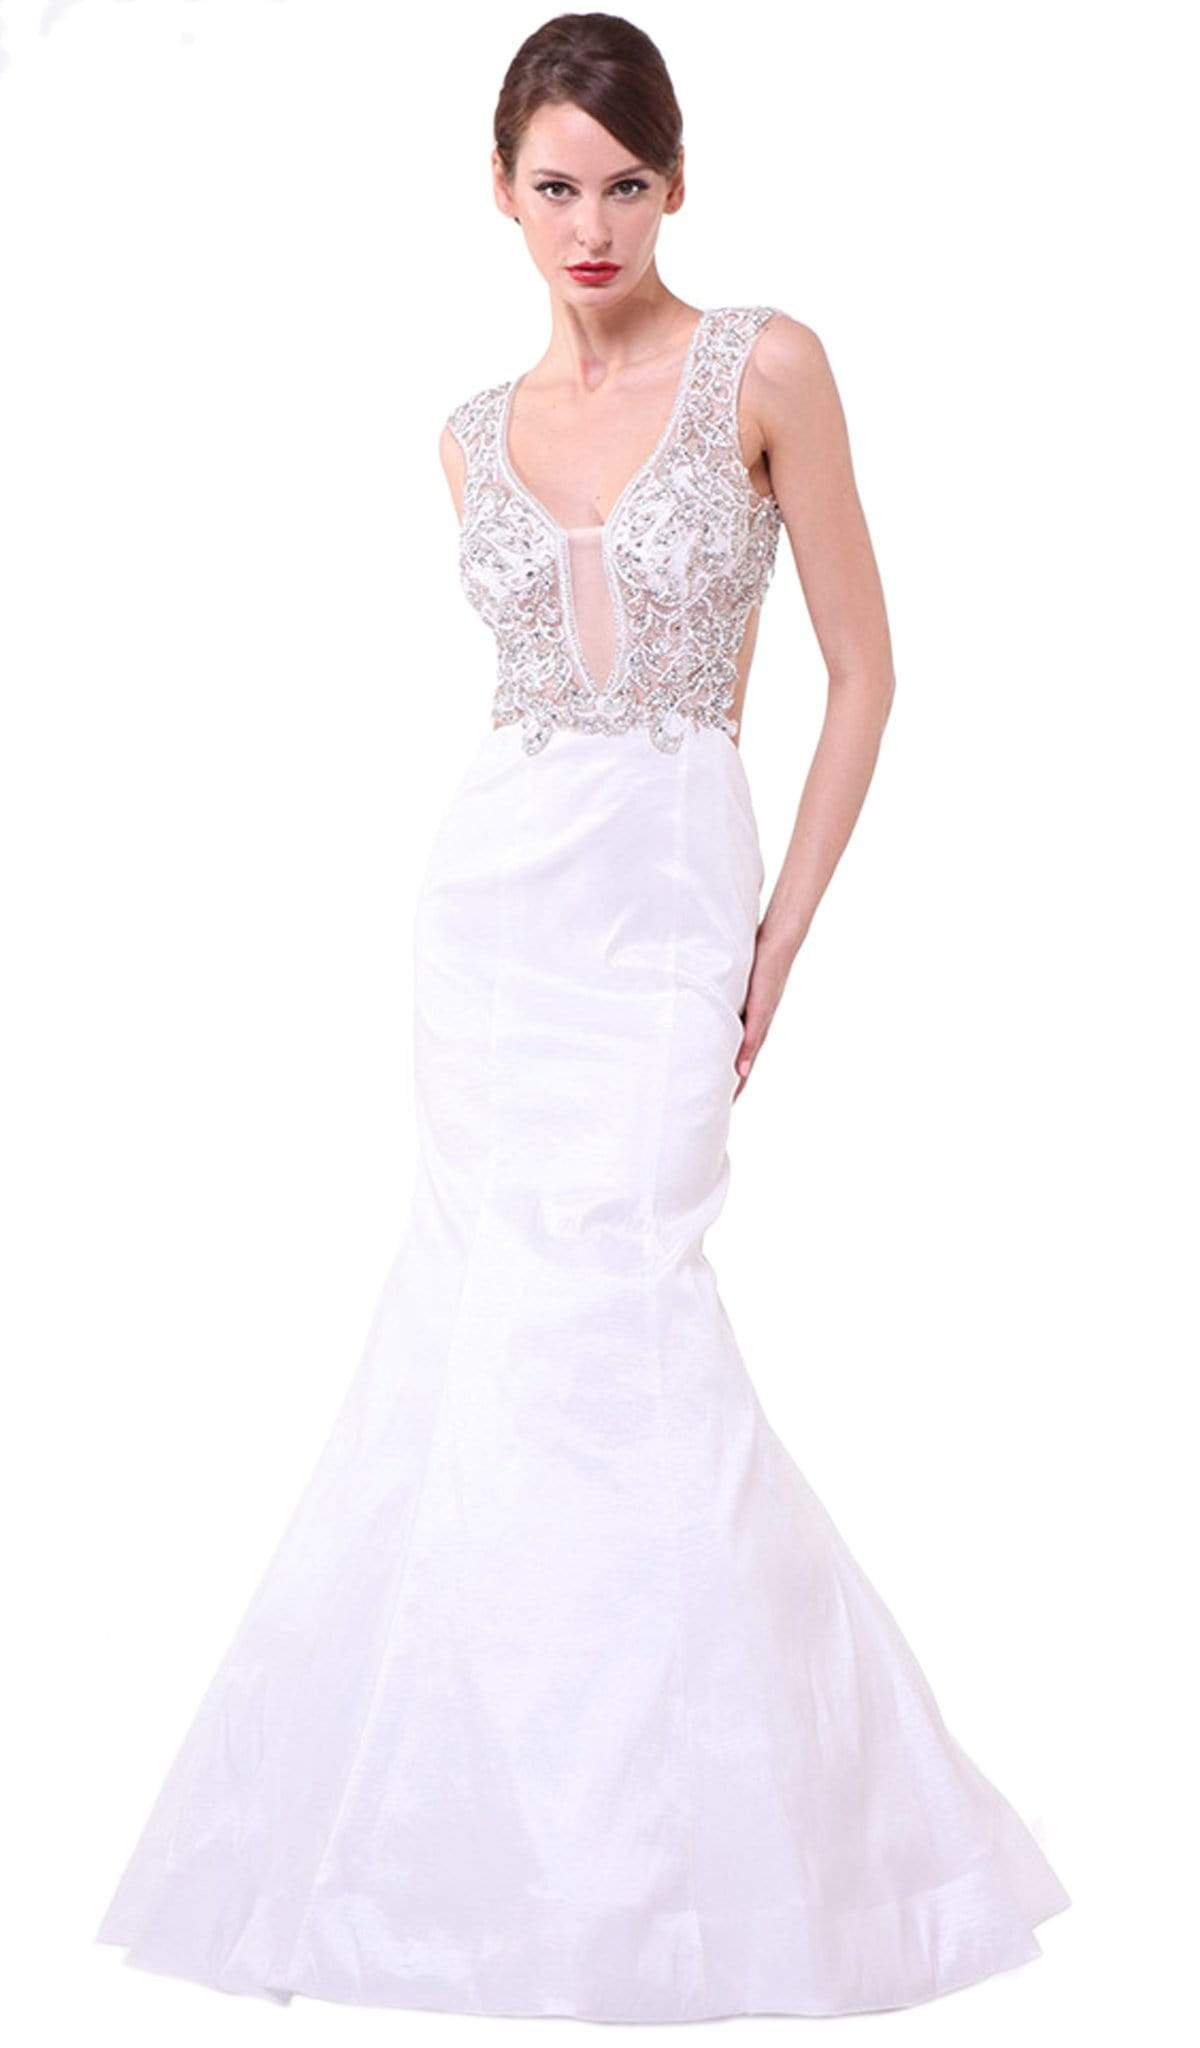 Cinderella Divine - Plunging Illusion Notched Embellished Evening Gown
